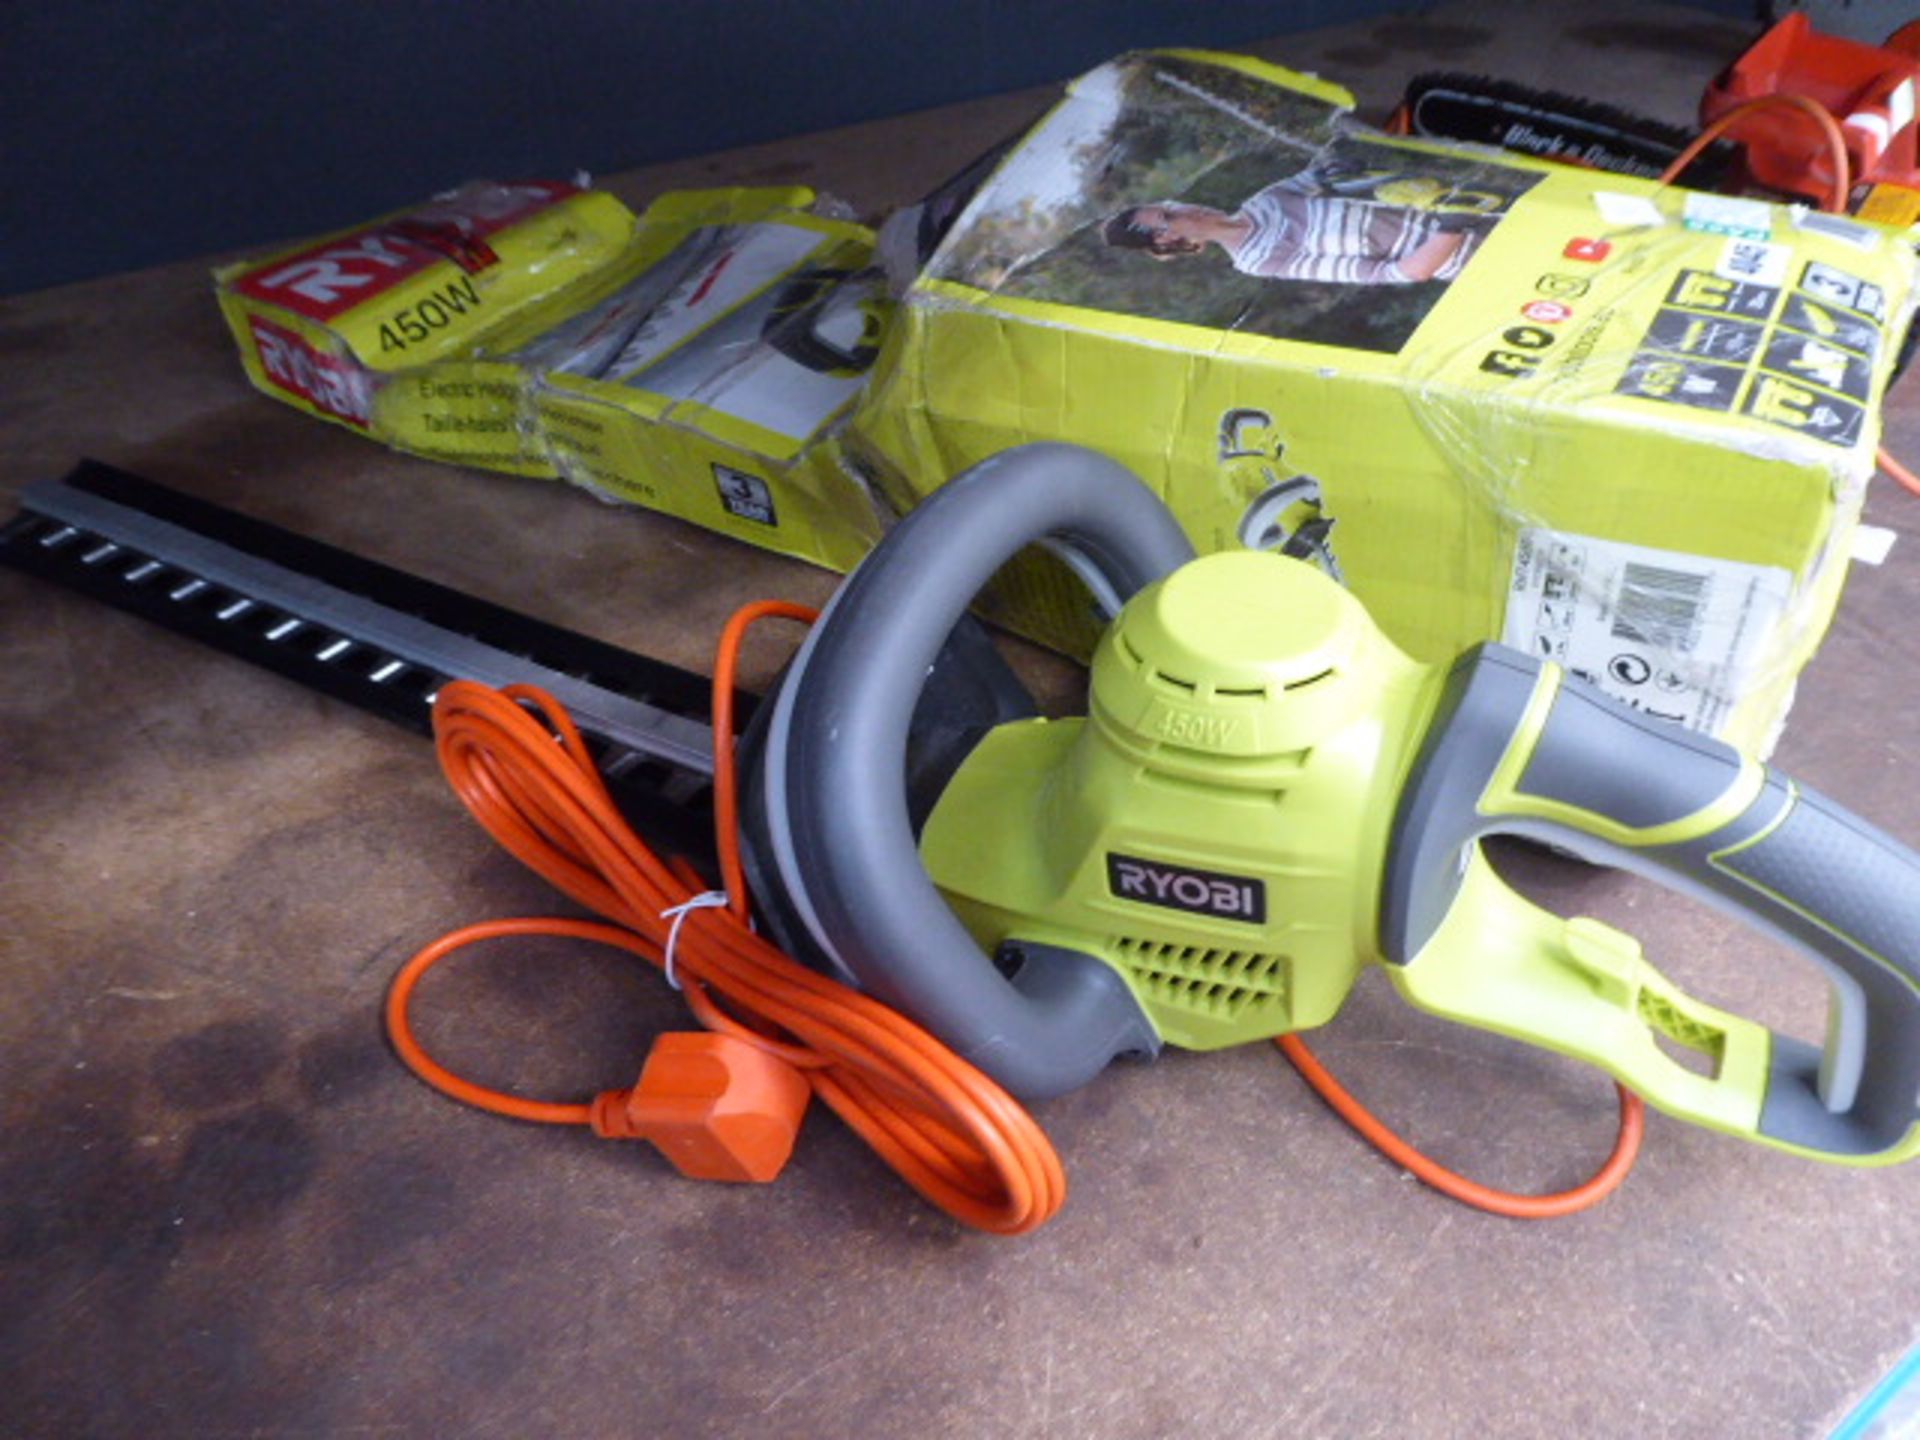 Ryobi boxed electric hedge cutter and hand saw - Image 2 of 2